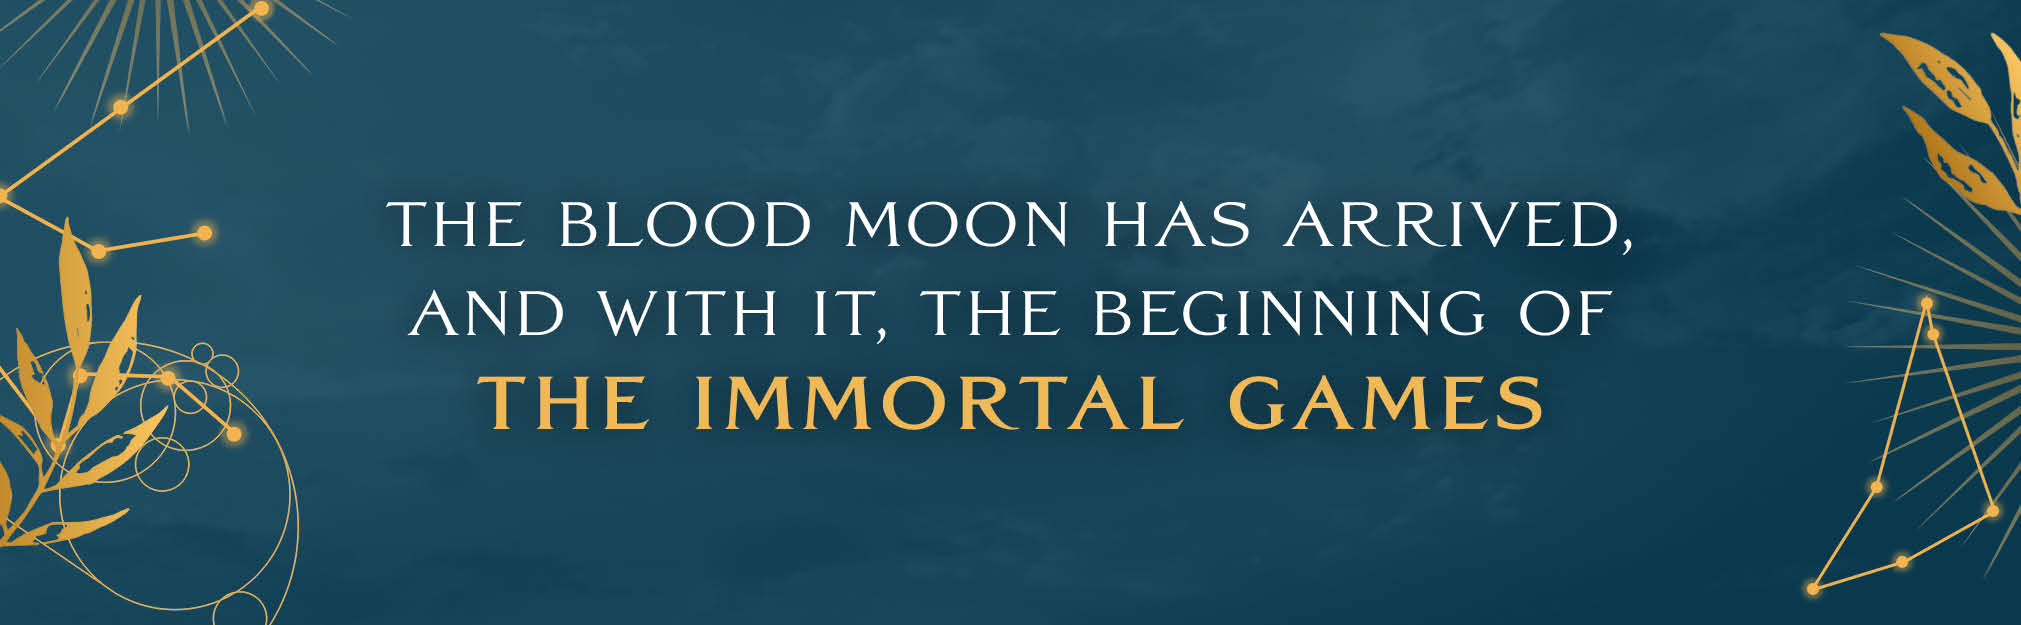 Annaliese Avery ✨📚 (she/her) updates only on X: How would you like to get  your hands on an early copy of this summer's must-read epic YA romantacy  adventure - The Immortal Games?